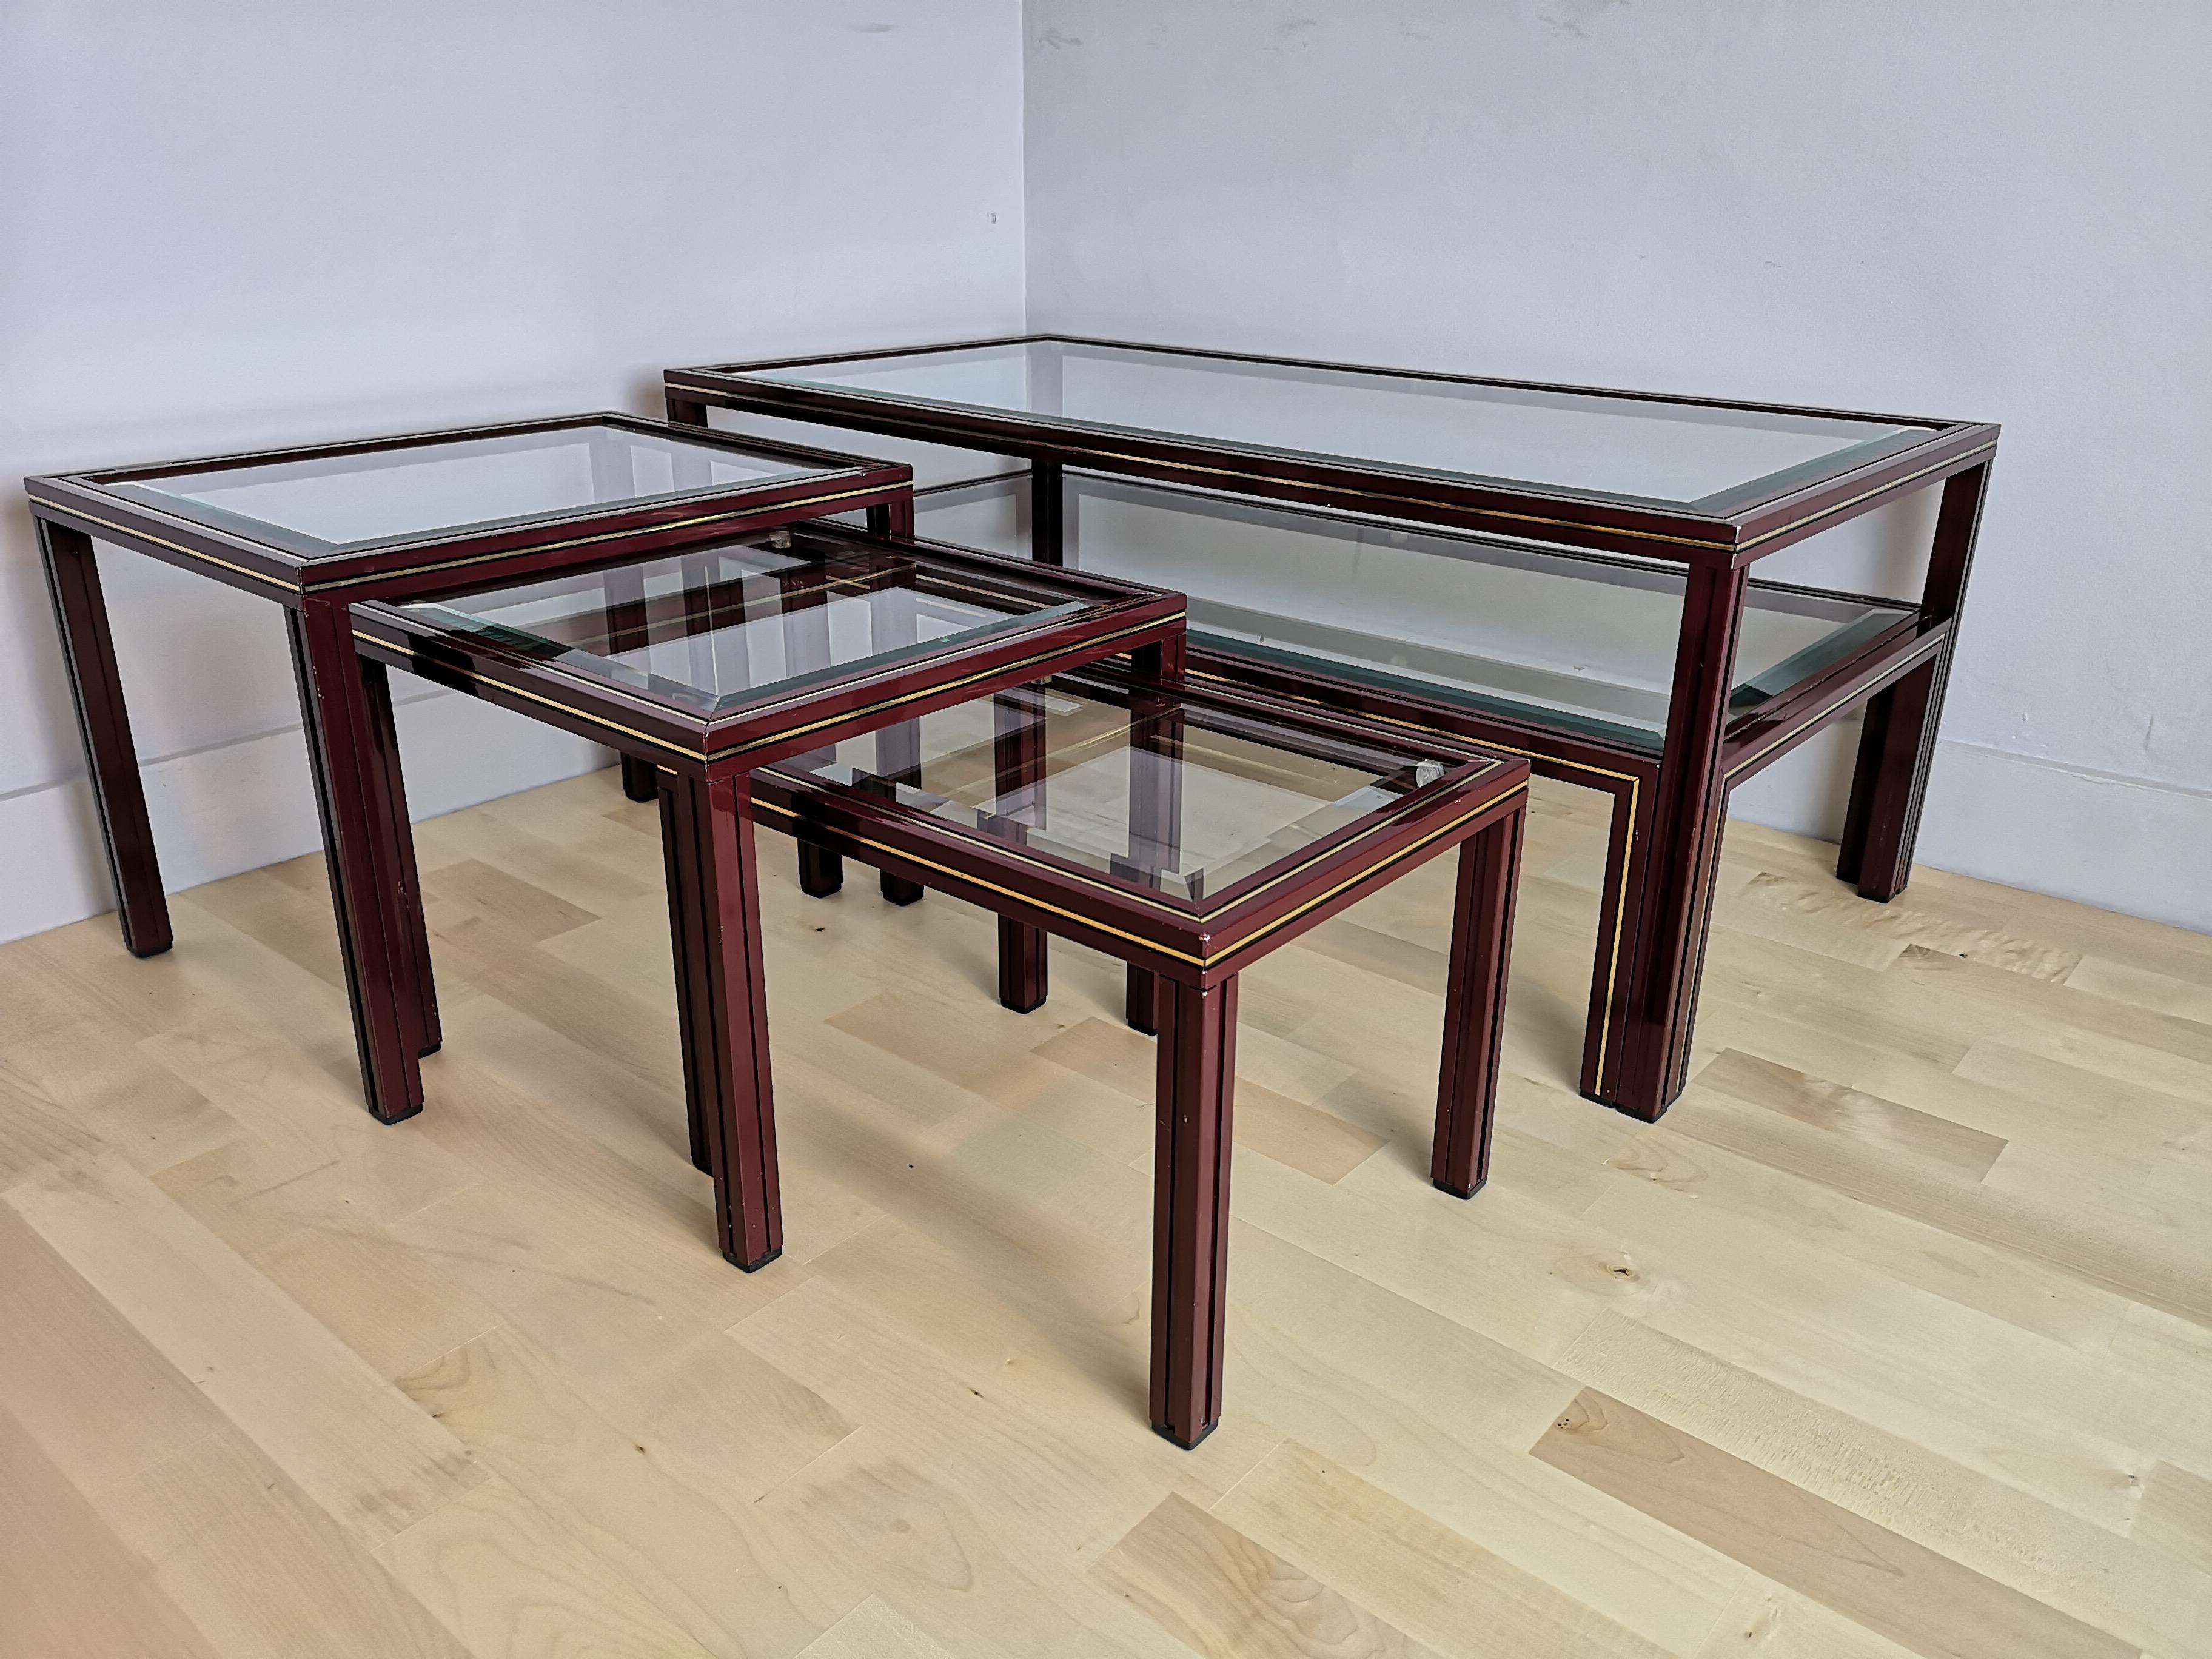 A stunning 1970s French midcentury aluminium and glass nest of 3 tables by Pierre Vandel, Paris in burgundy red color. Good vintage condition, with some small knocks and scratches commensurate with age. 

Dimensions for the tables are:

40.5 x